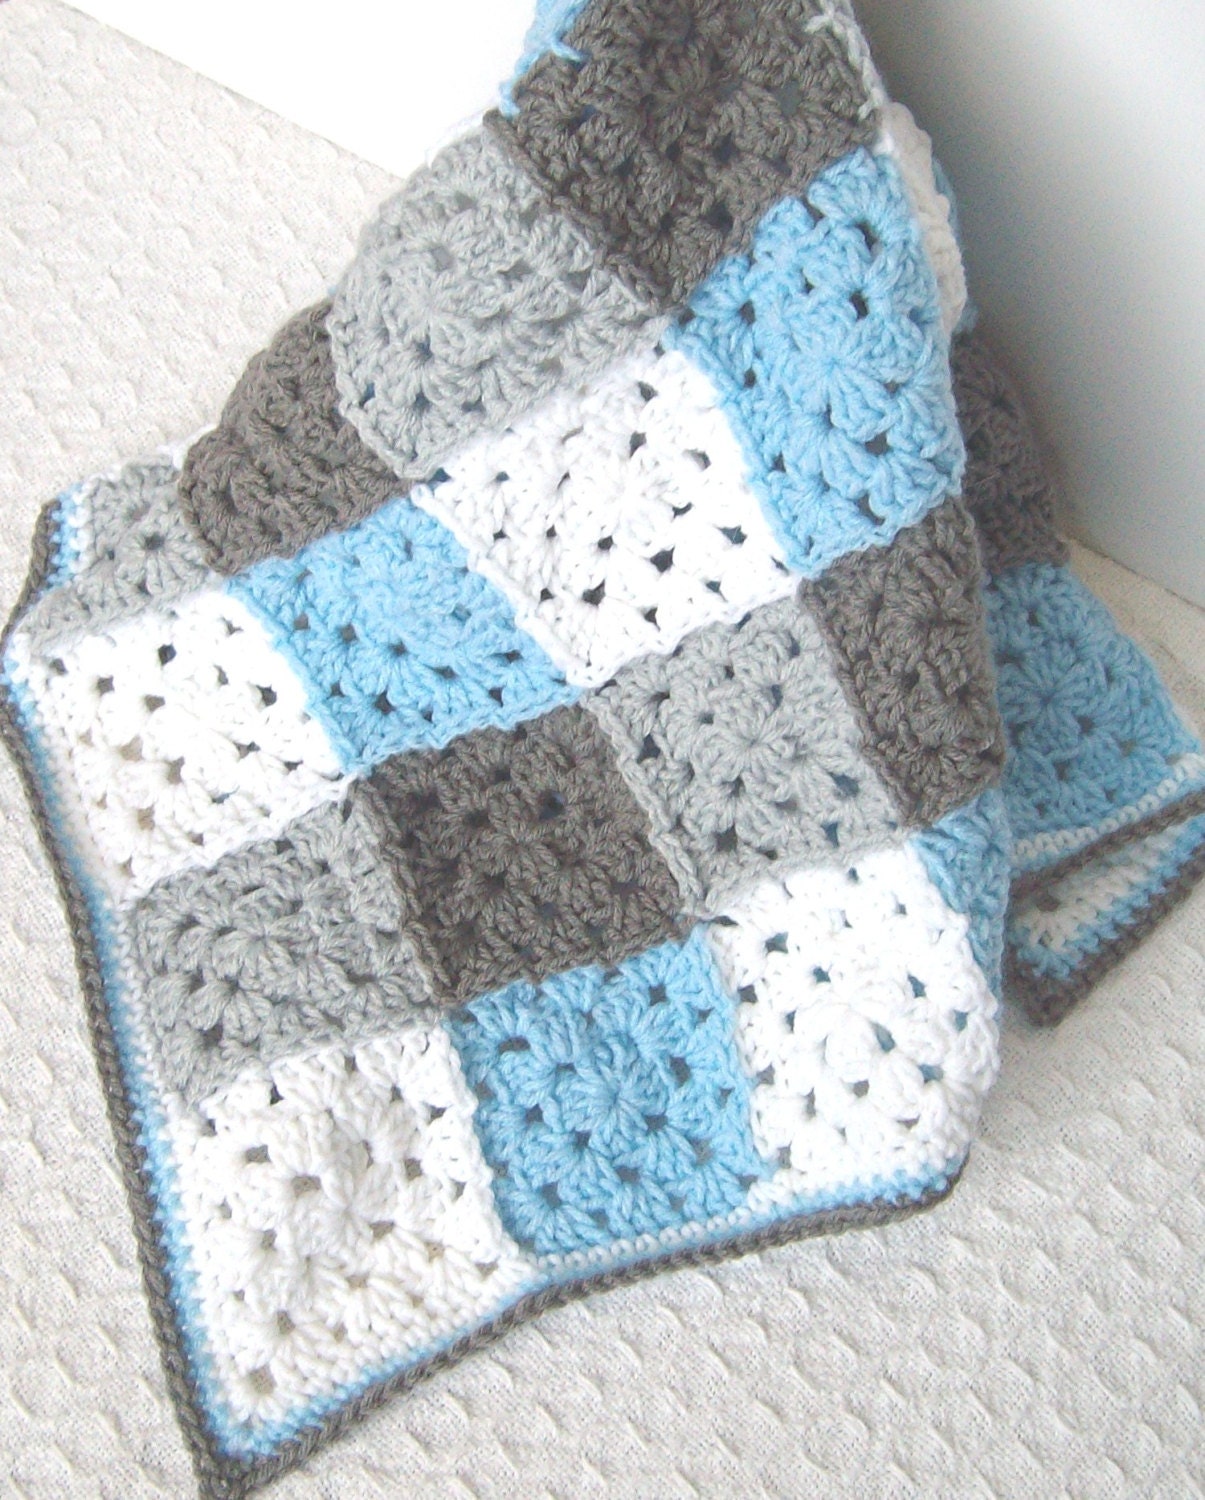 Personalized Baby Blanket Silver Grey and Navy Blue Minky